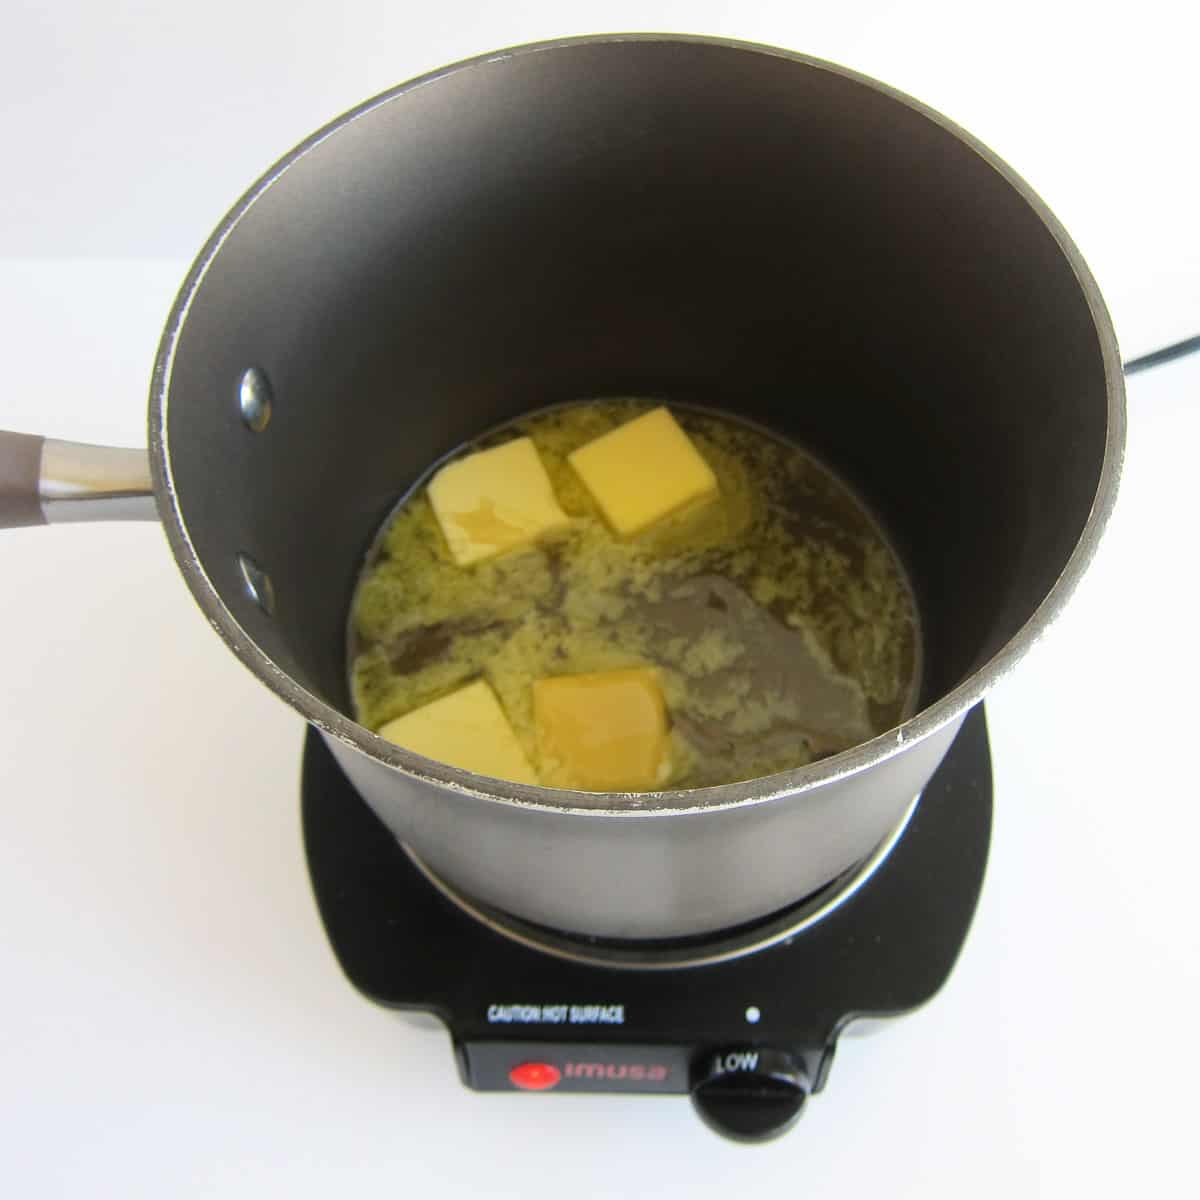 melting butter and honey in a saucepan over low heat.